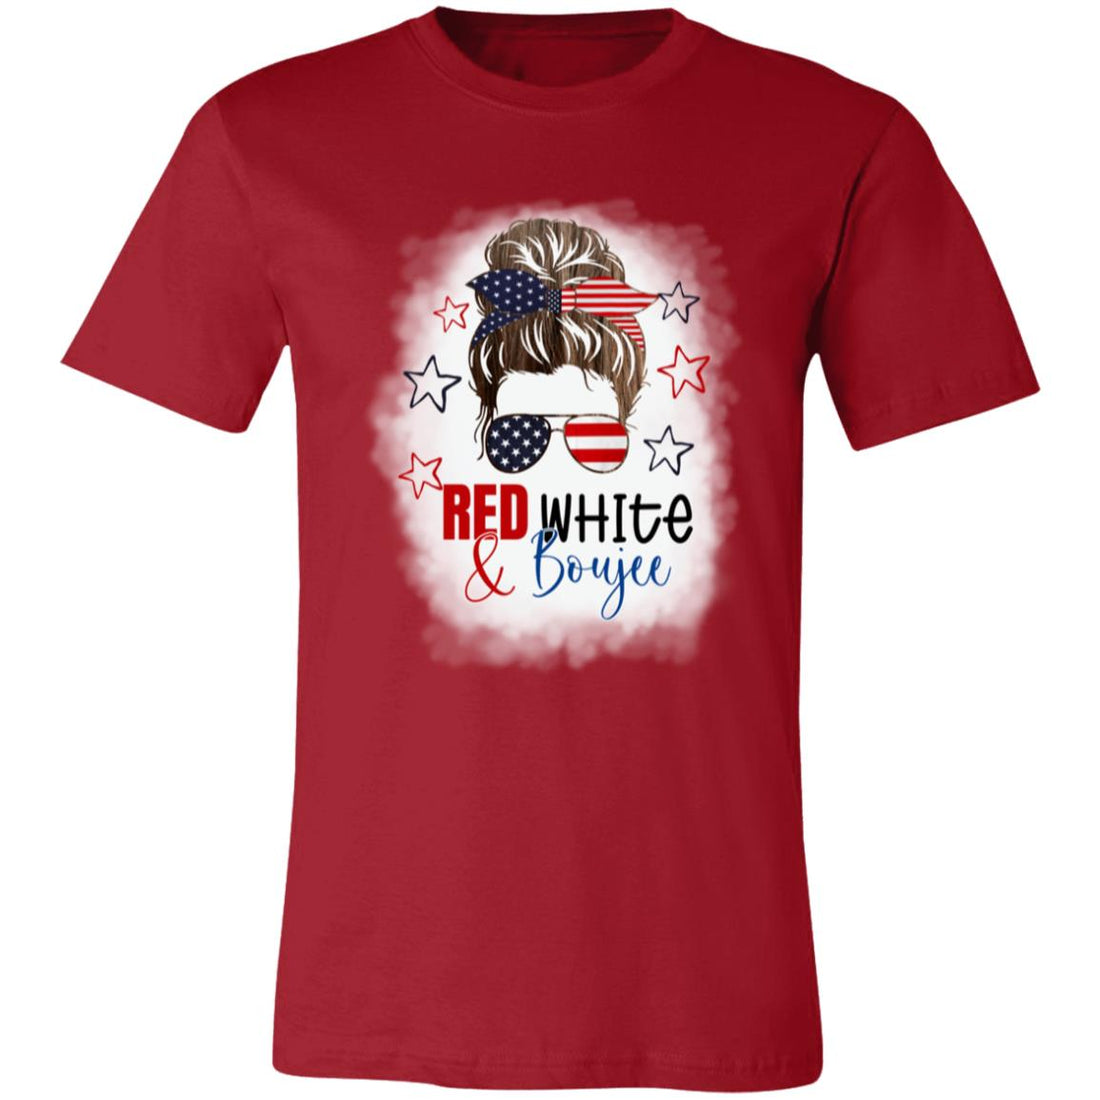 Red, White & BoujeeT-Shirt - T-Shirts - Positively Sassy - Red, White & BoujeeT-Shirt